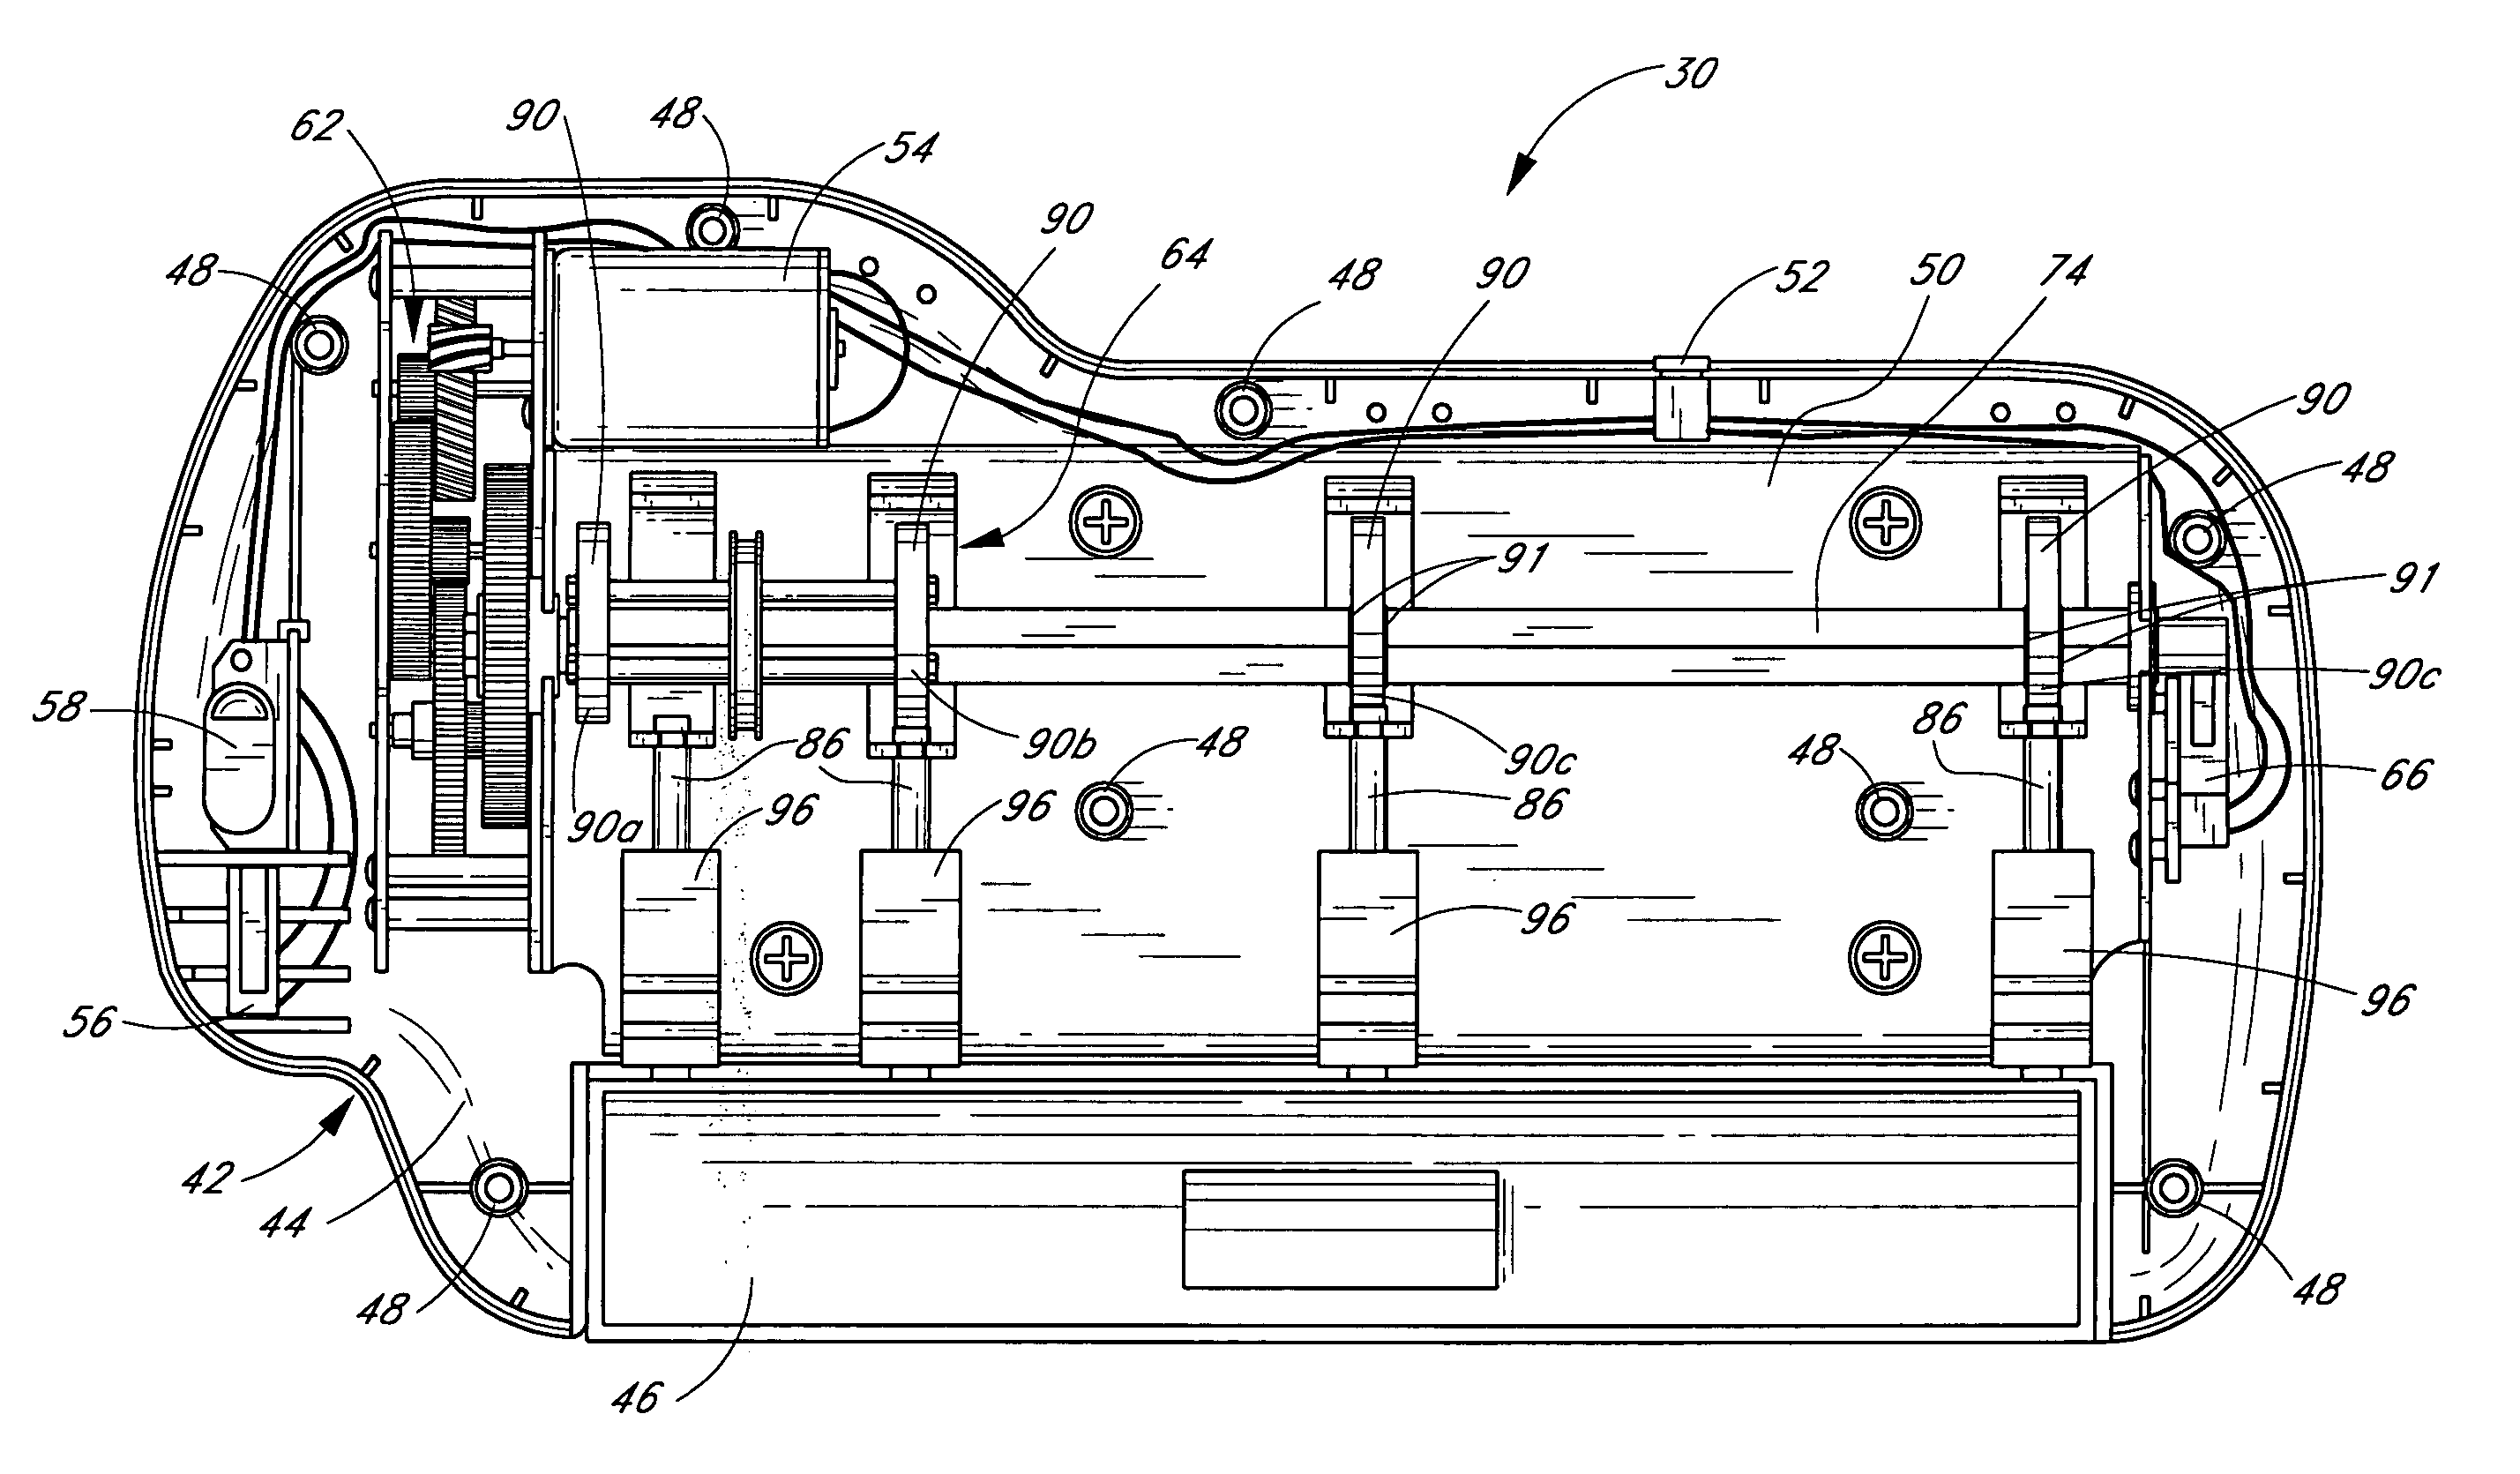 Automatic hole punching devices and methods